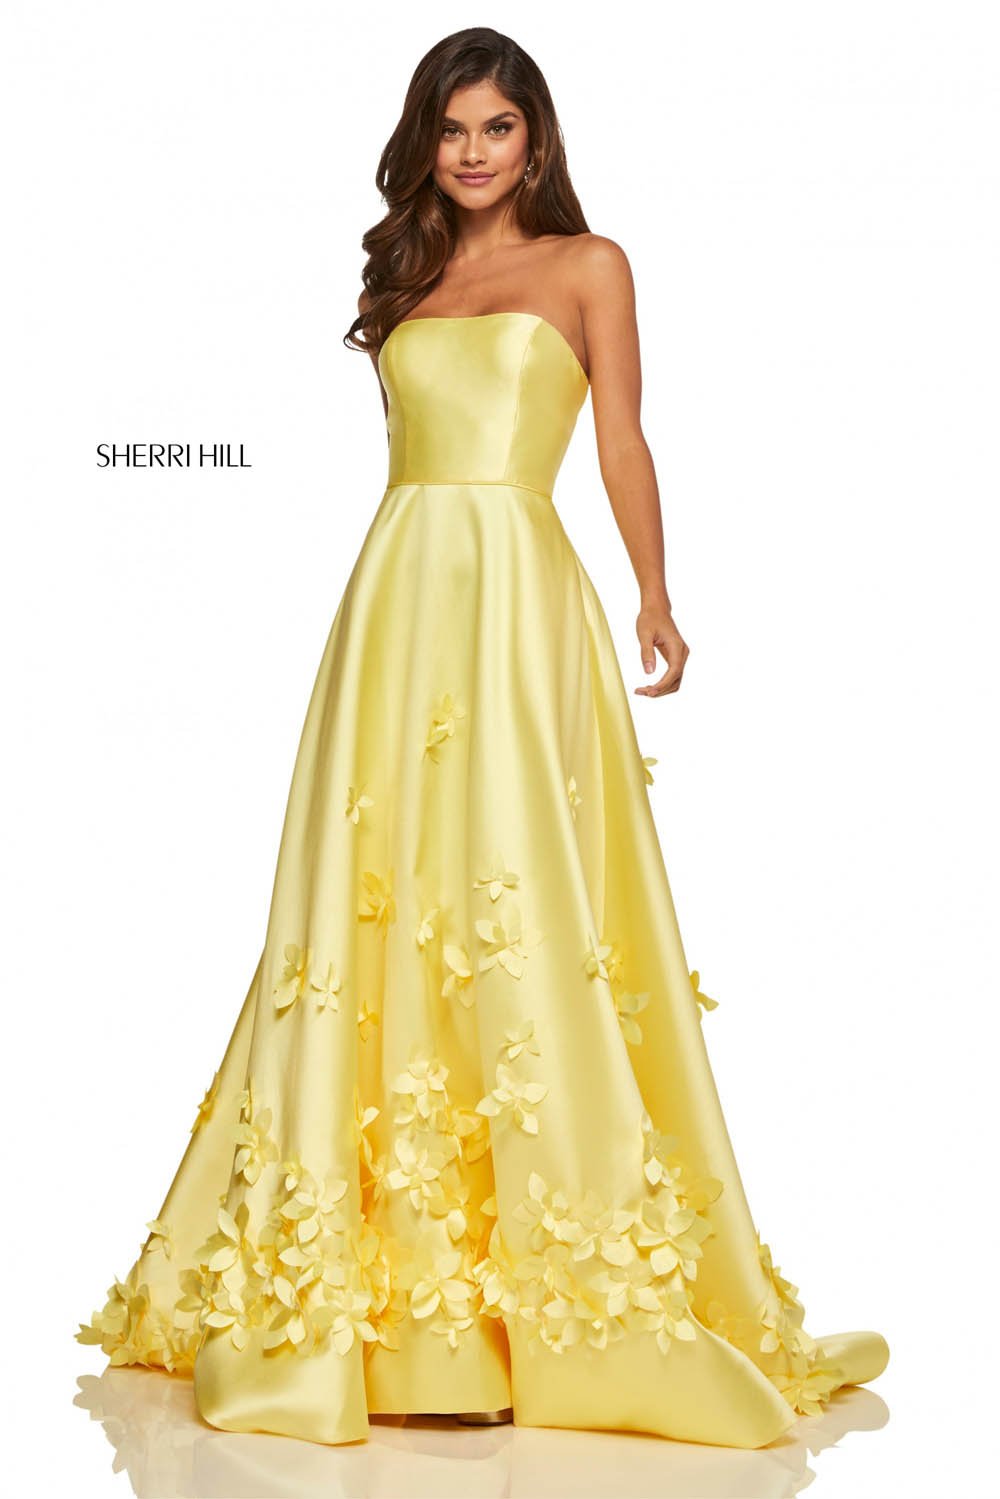 Sherri Hill 52582 dress images in these colors: Lilac, Light Blue, Pink, Red, Yellow, Ivory, Coral.